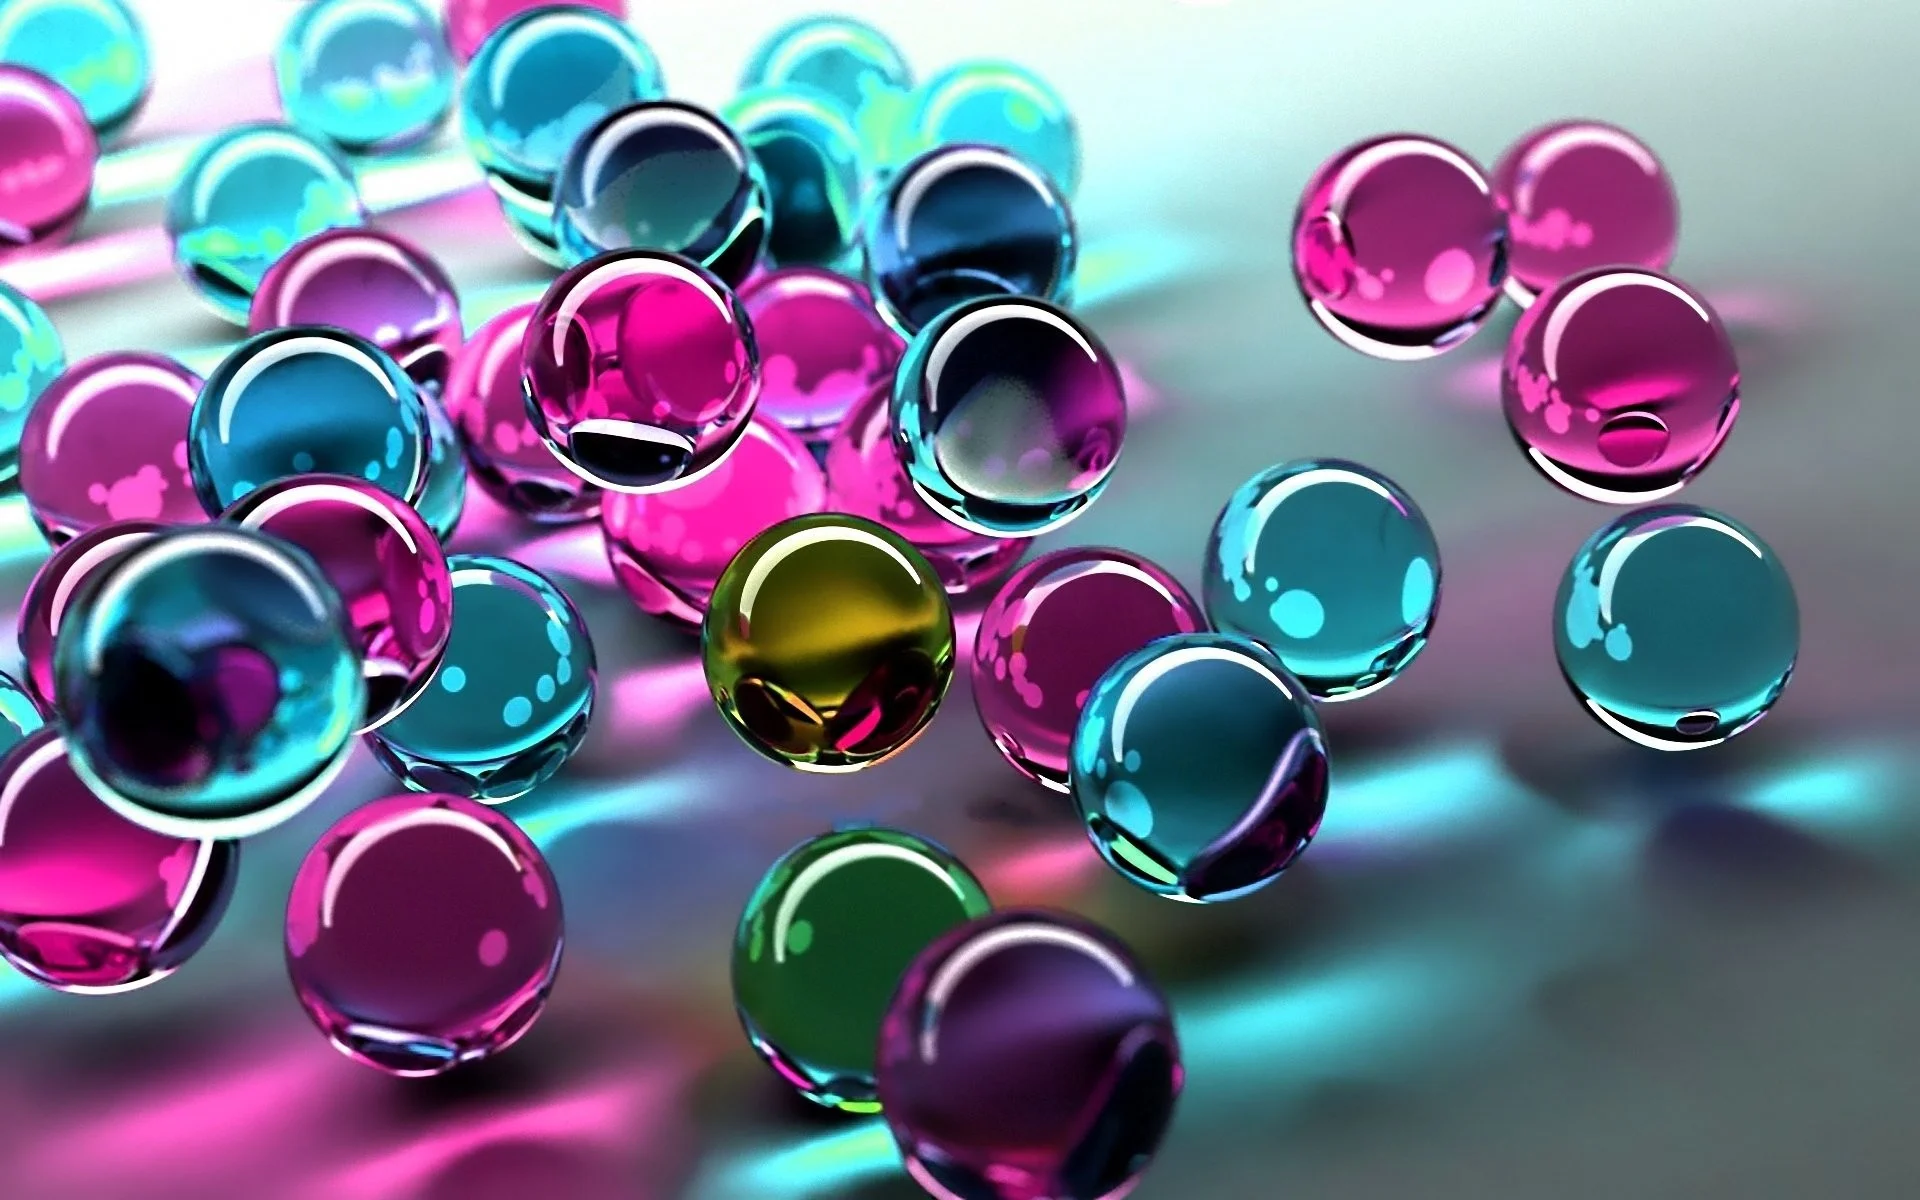 Colorful 3d abstract wallpaper high resolution 2szi